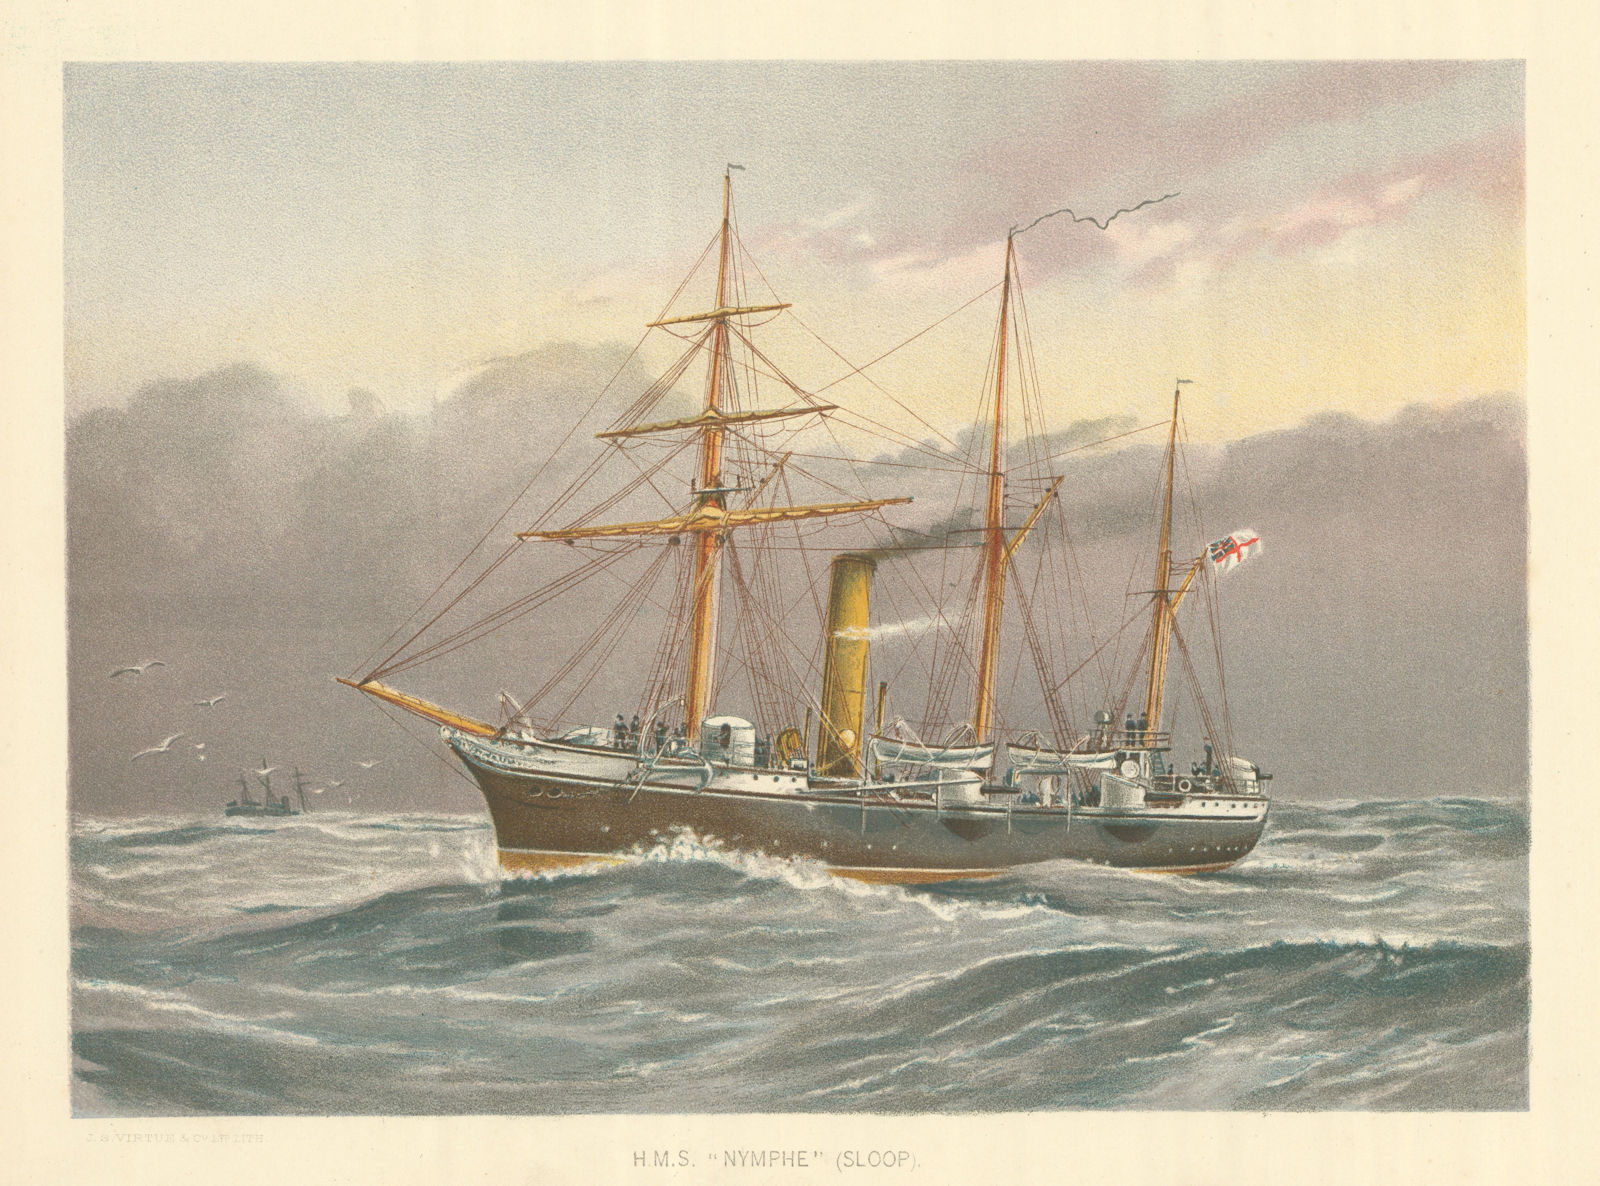 H.M.S. "Nymphe" (sloop) (1888) by W.F. Mitchell. Royal Navy 1893 old print